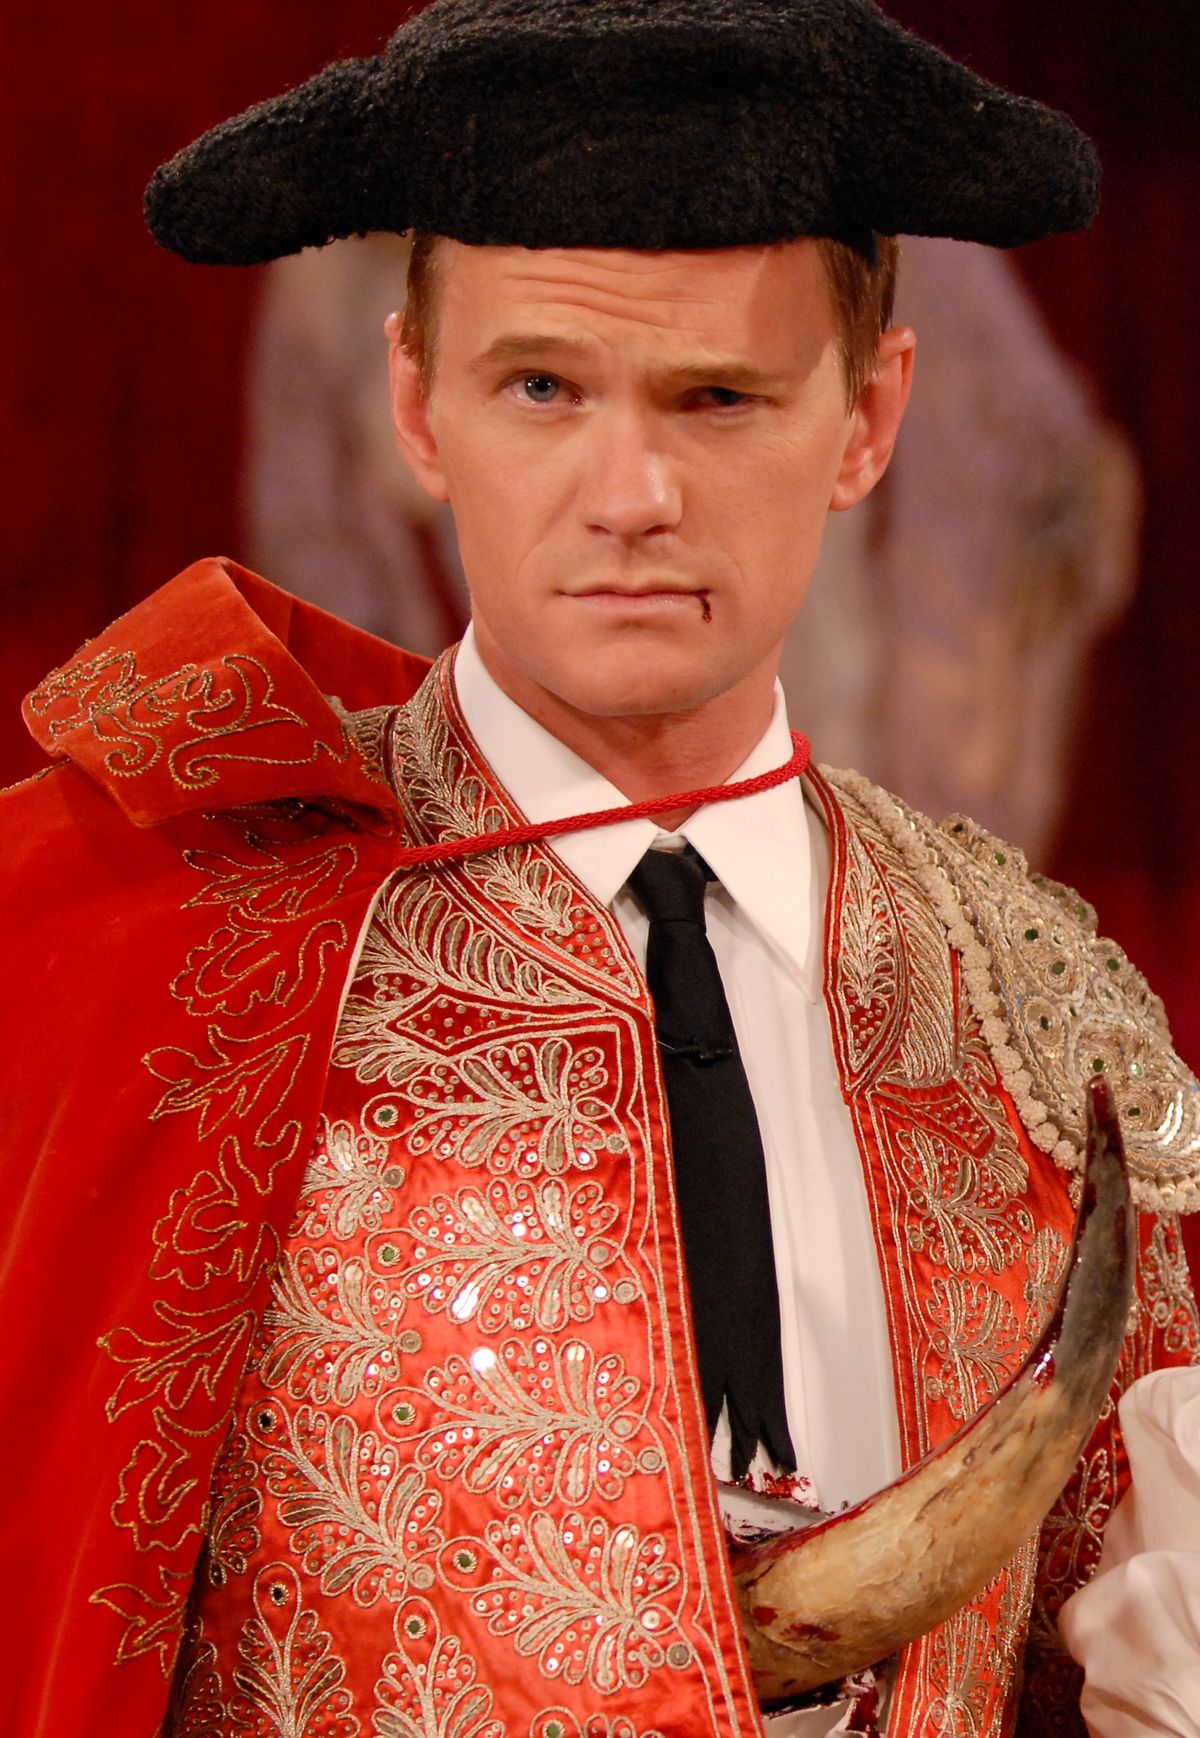 THE MEGAN MULLALLY SHOW -- Episode 1032 -- Pictured: Actor Neil Patrick Harris during an interview dressed in costume on October 31, 2006 -- Photo by: Dave Bjerke/NBCU Photo Bank (Dave Bjerke)